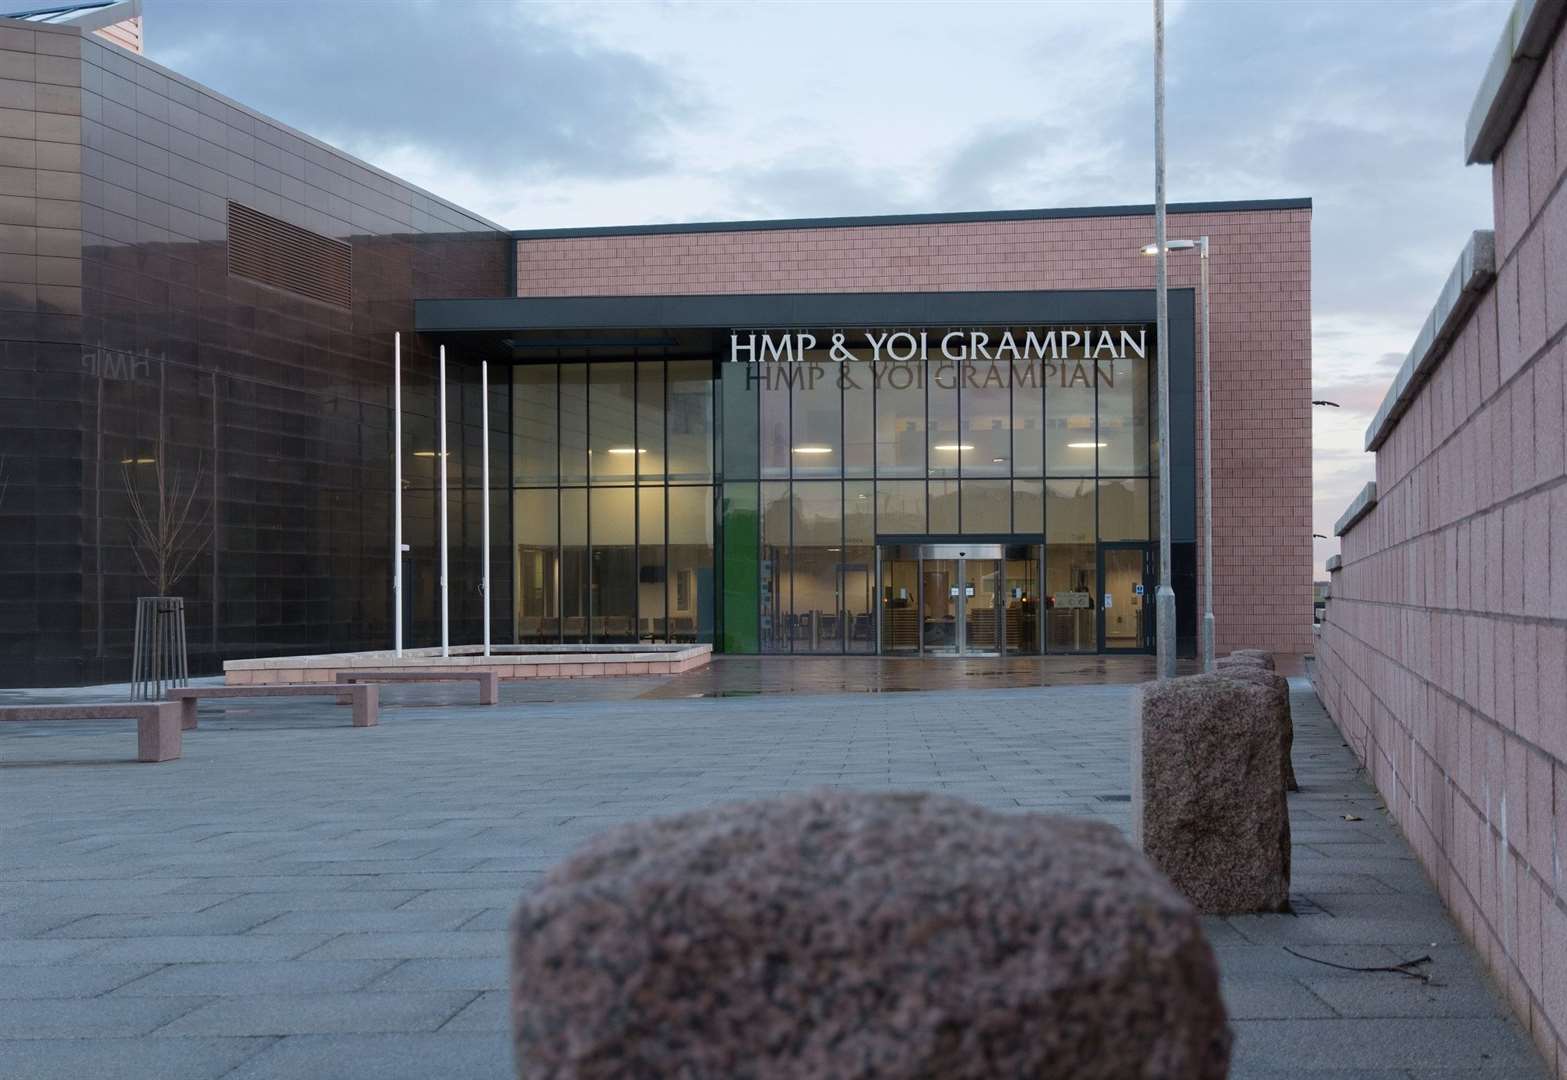 The incident took place in the car park of HMP and YOI Grampian in Peterhead.